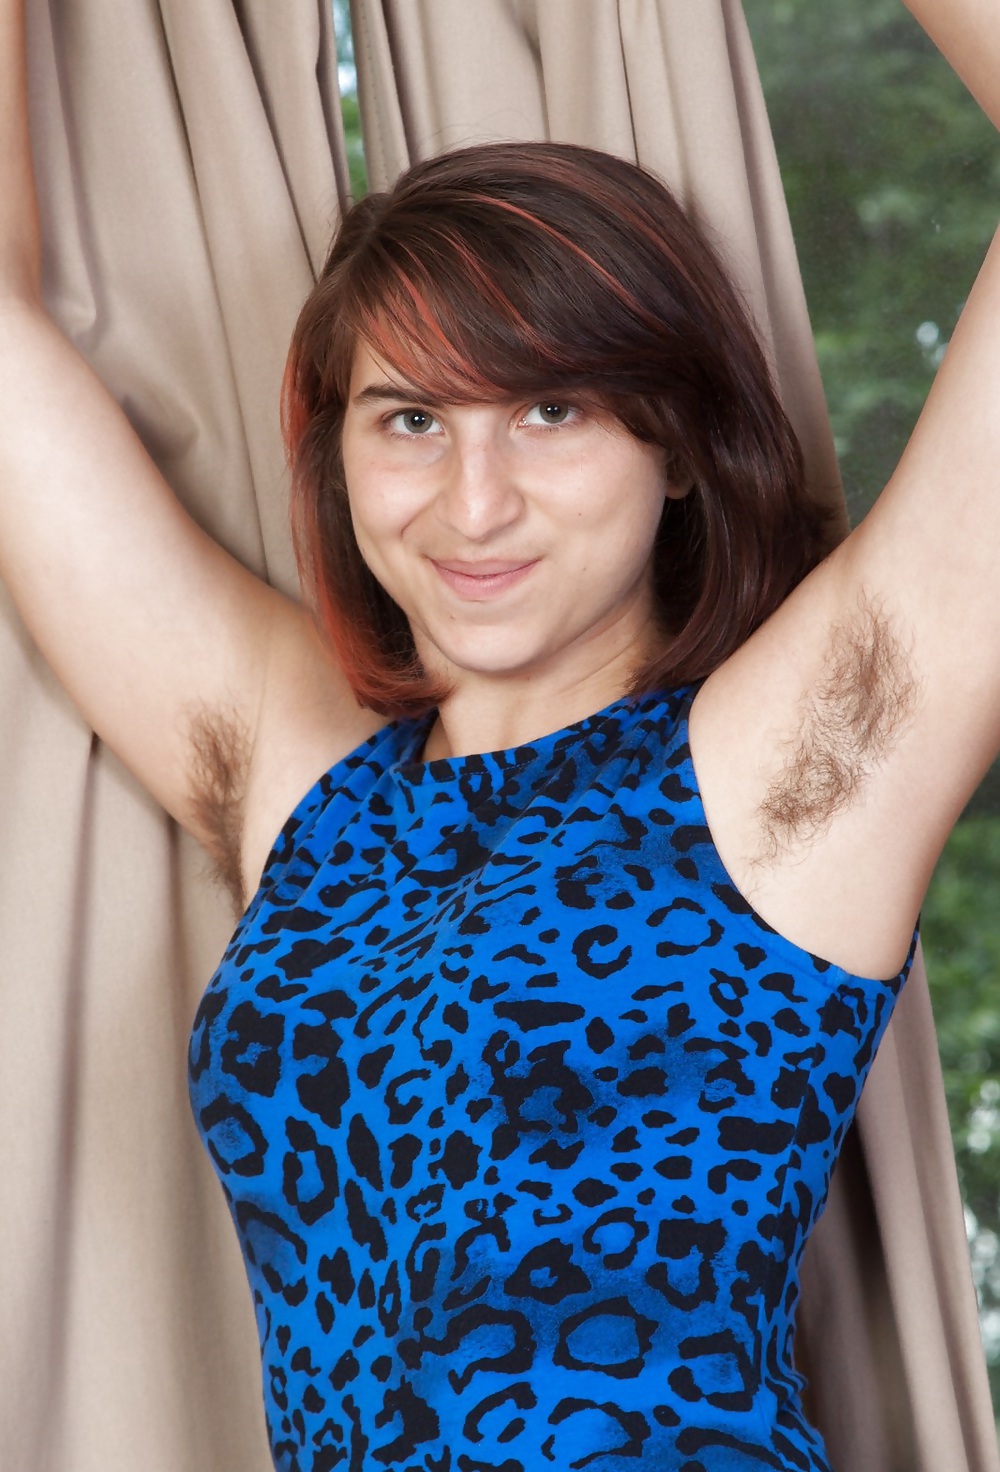 Miscellaneous girls showing hairy, unshaven armpits 3 #36174490